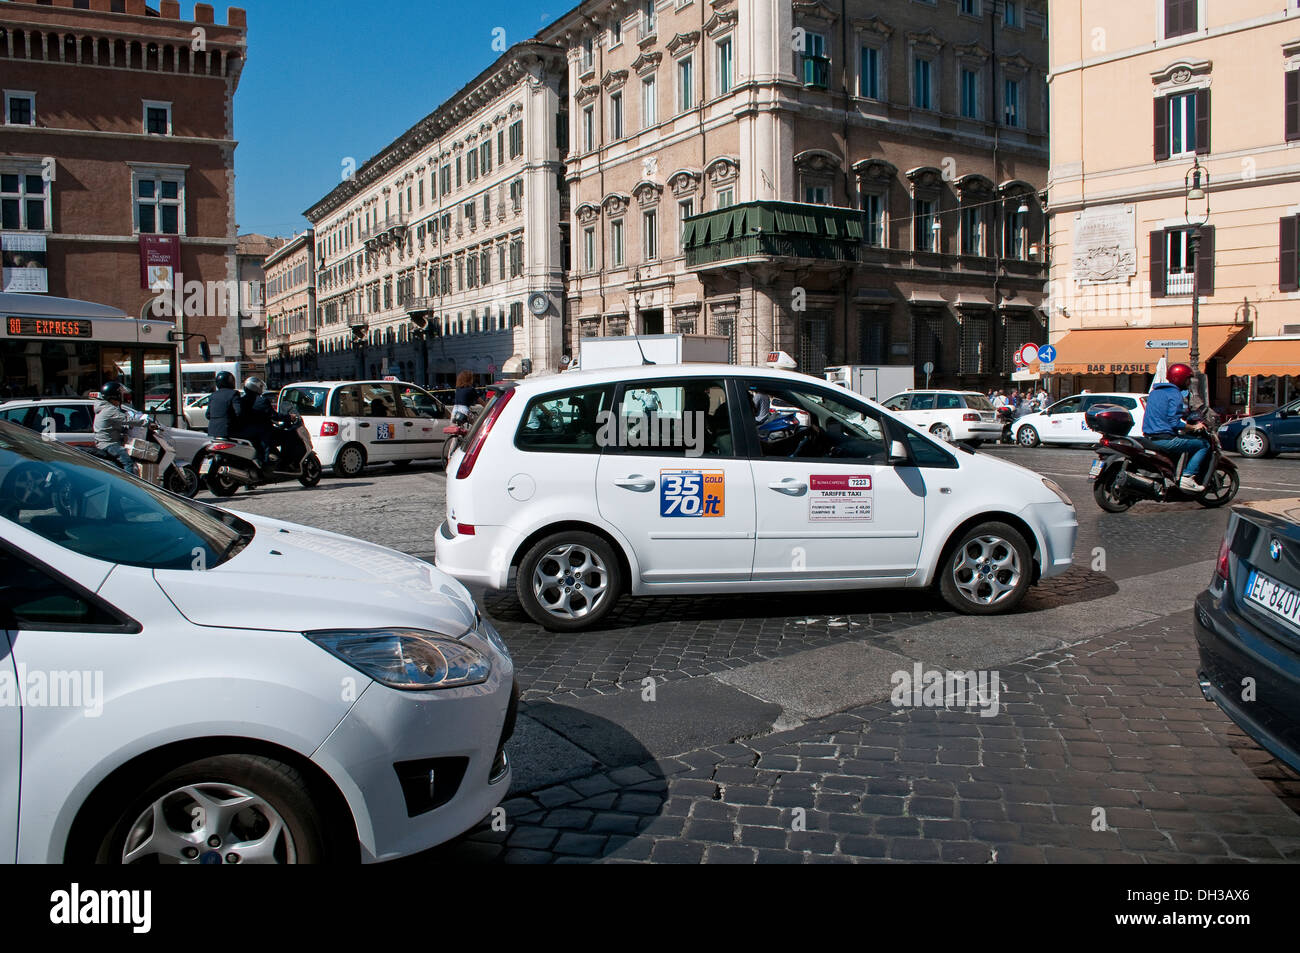 Traffic on Piazza Venezia with official Taxi Car in the centre, Rome, Italy Stock Photo